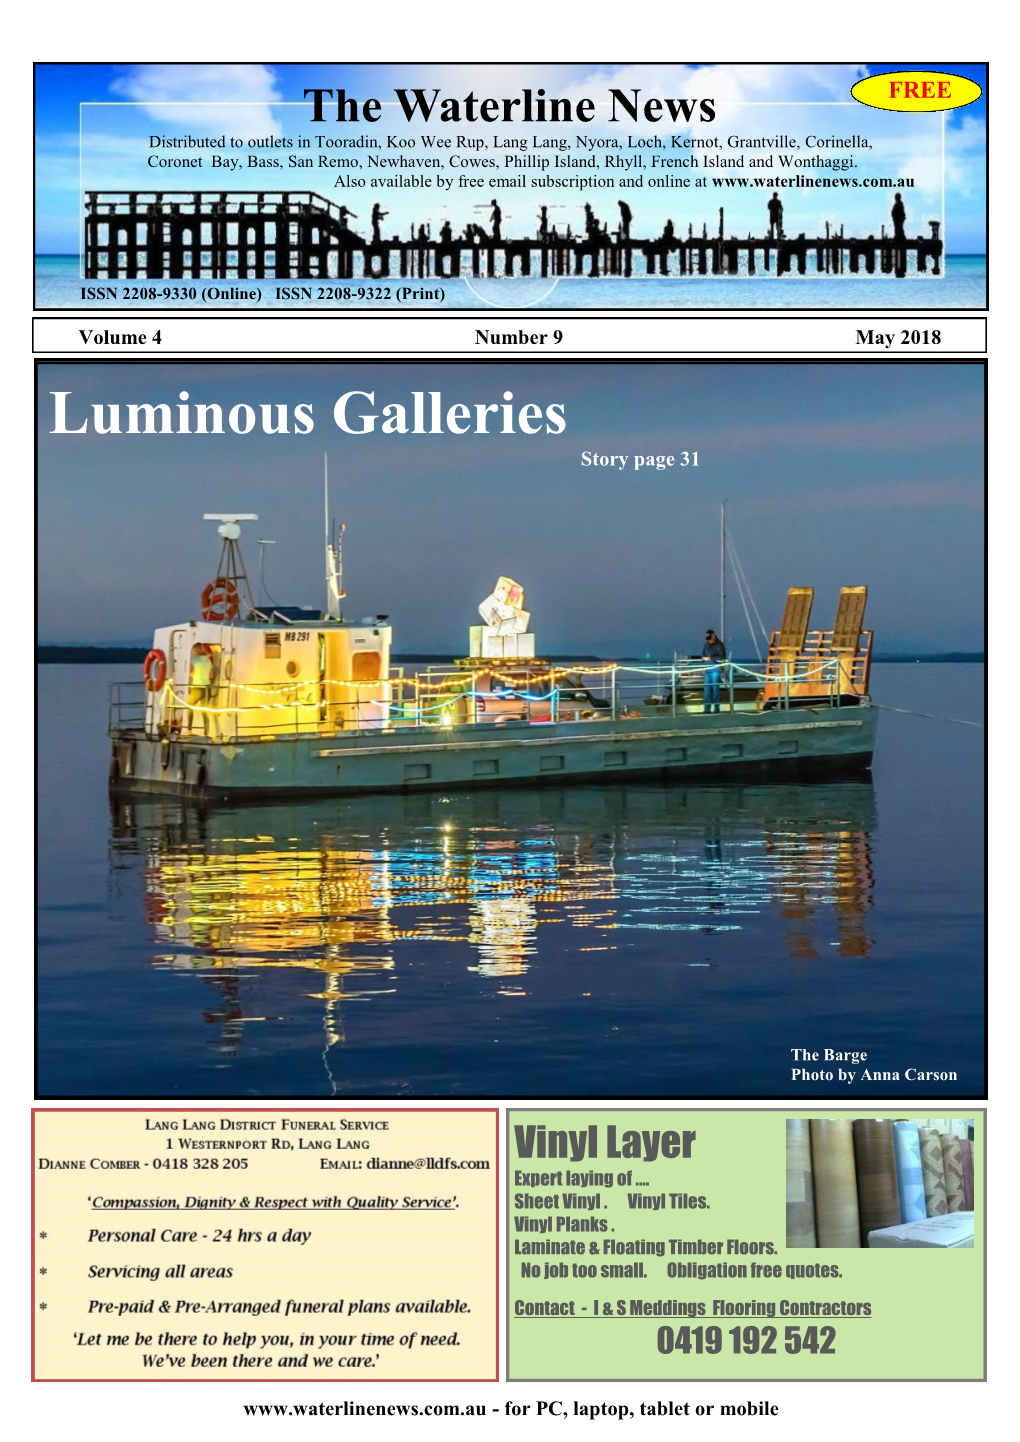 Luminous Galleries Galleries Story Page Story Page 31